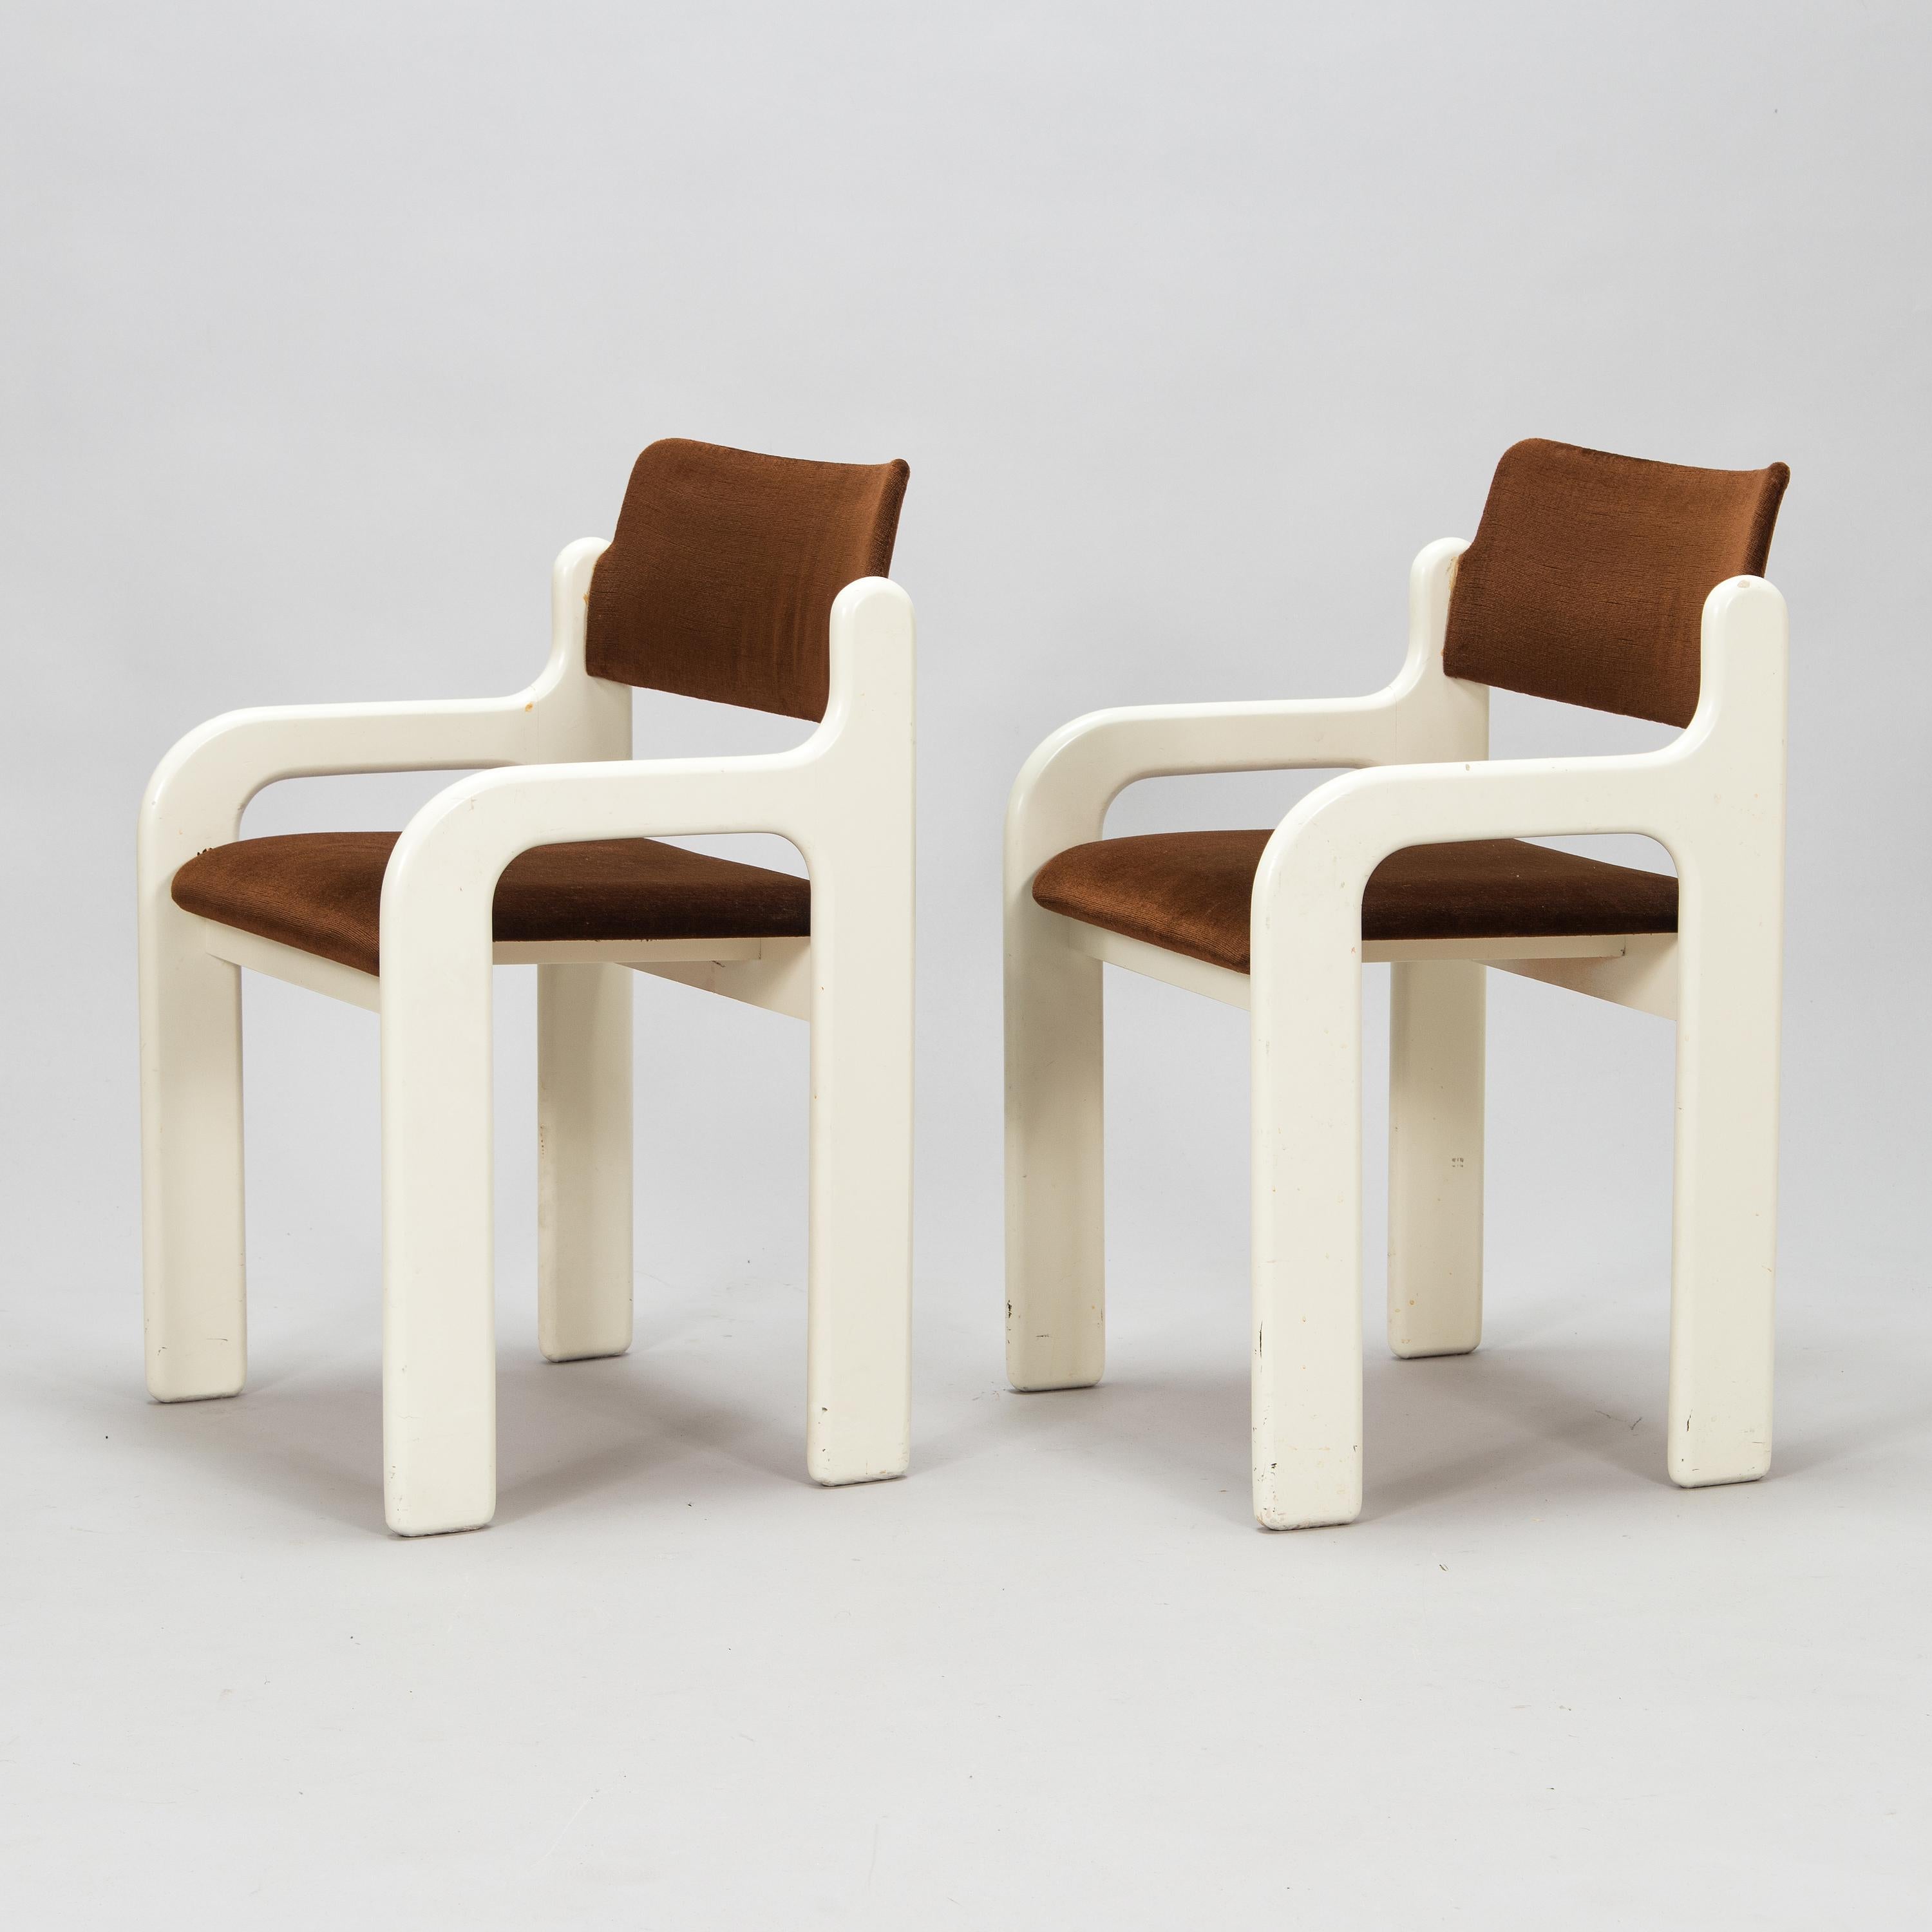 20th Century Eero Aarnio 4 Chairs Model Flamingo for Asko Finland Marked, 1970s  For Sale